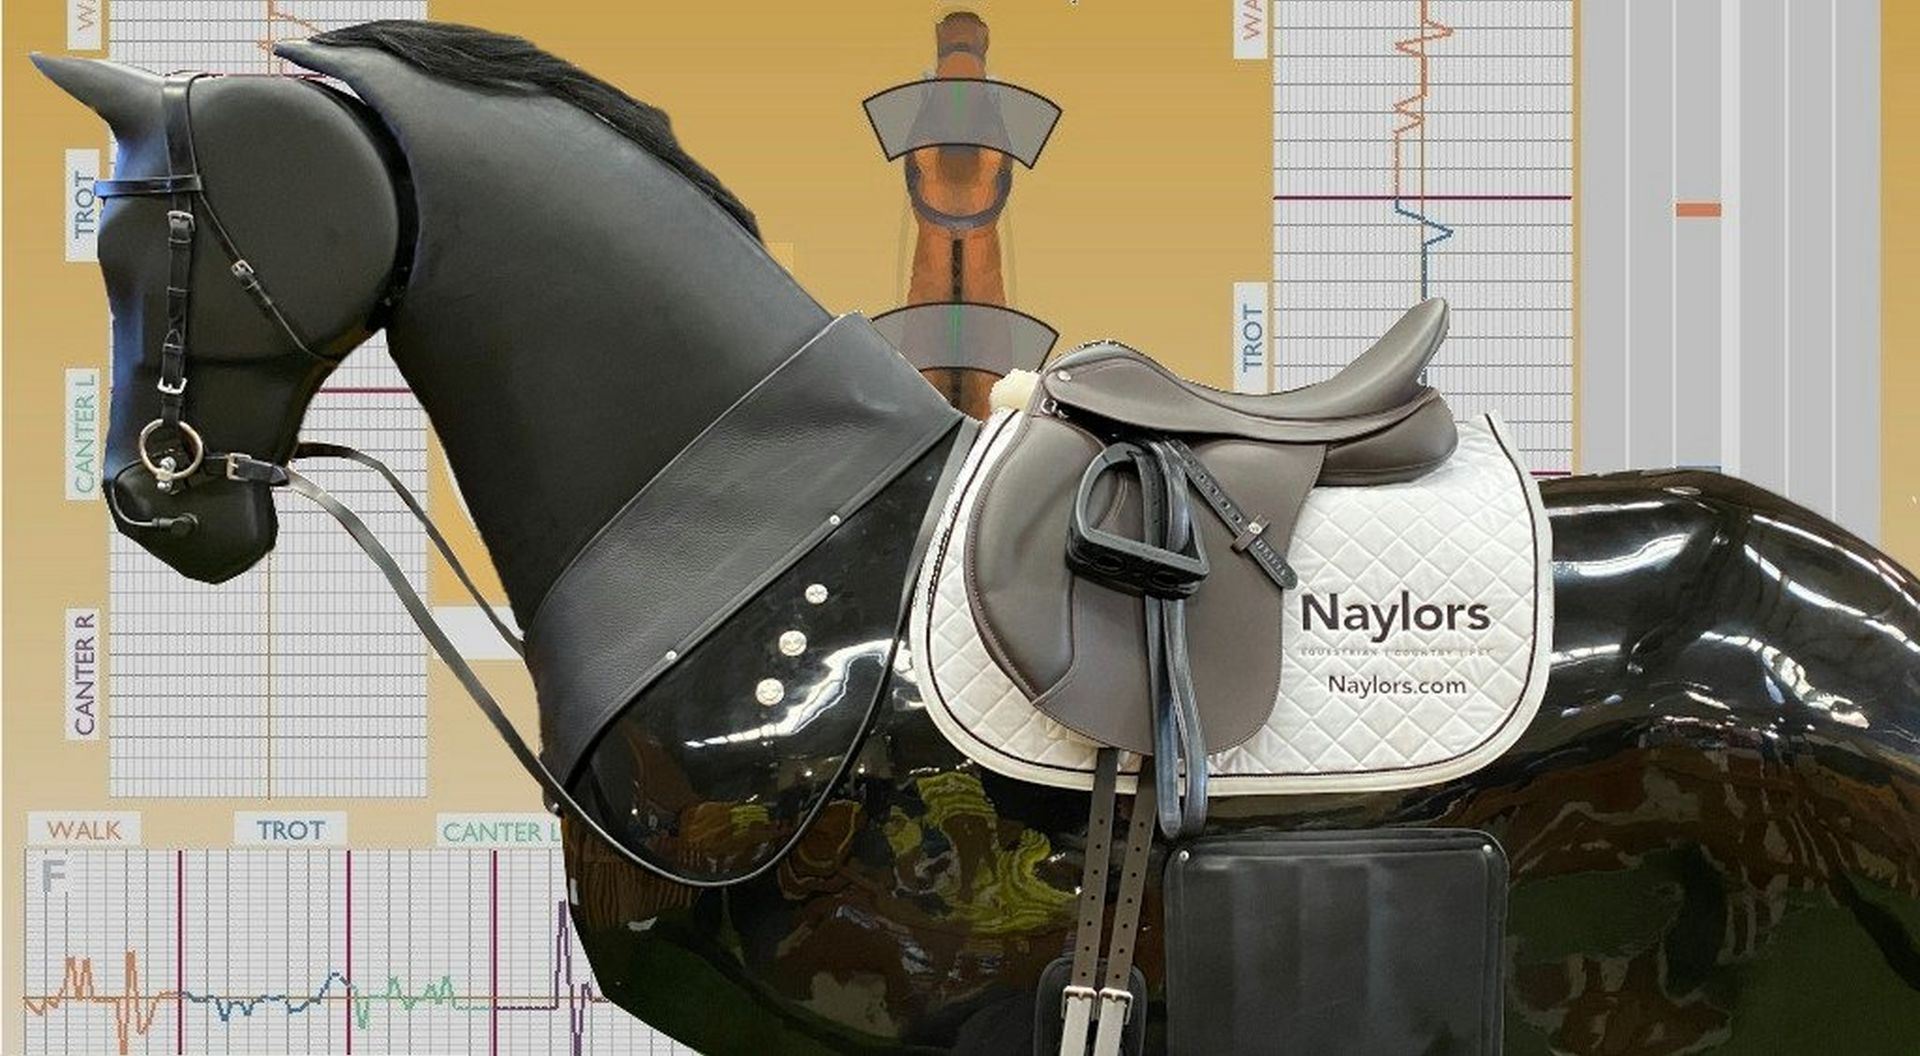 Reading Your Results – Naylors Horse Riding Simulator